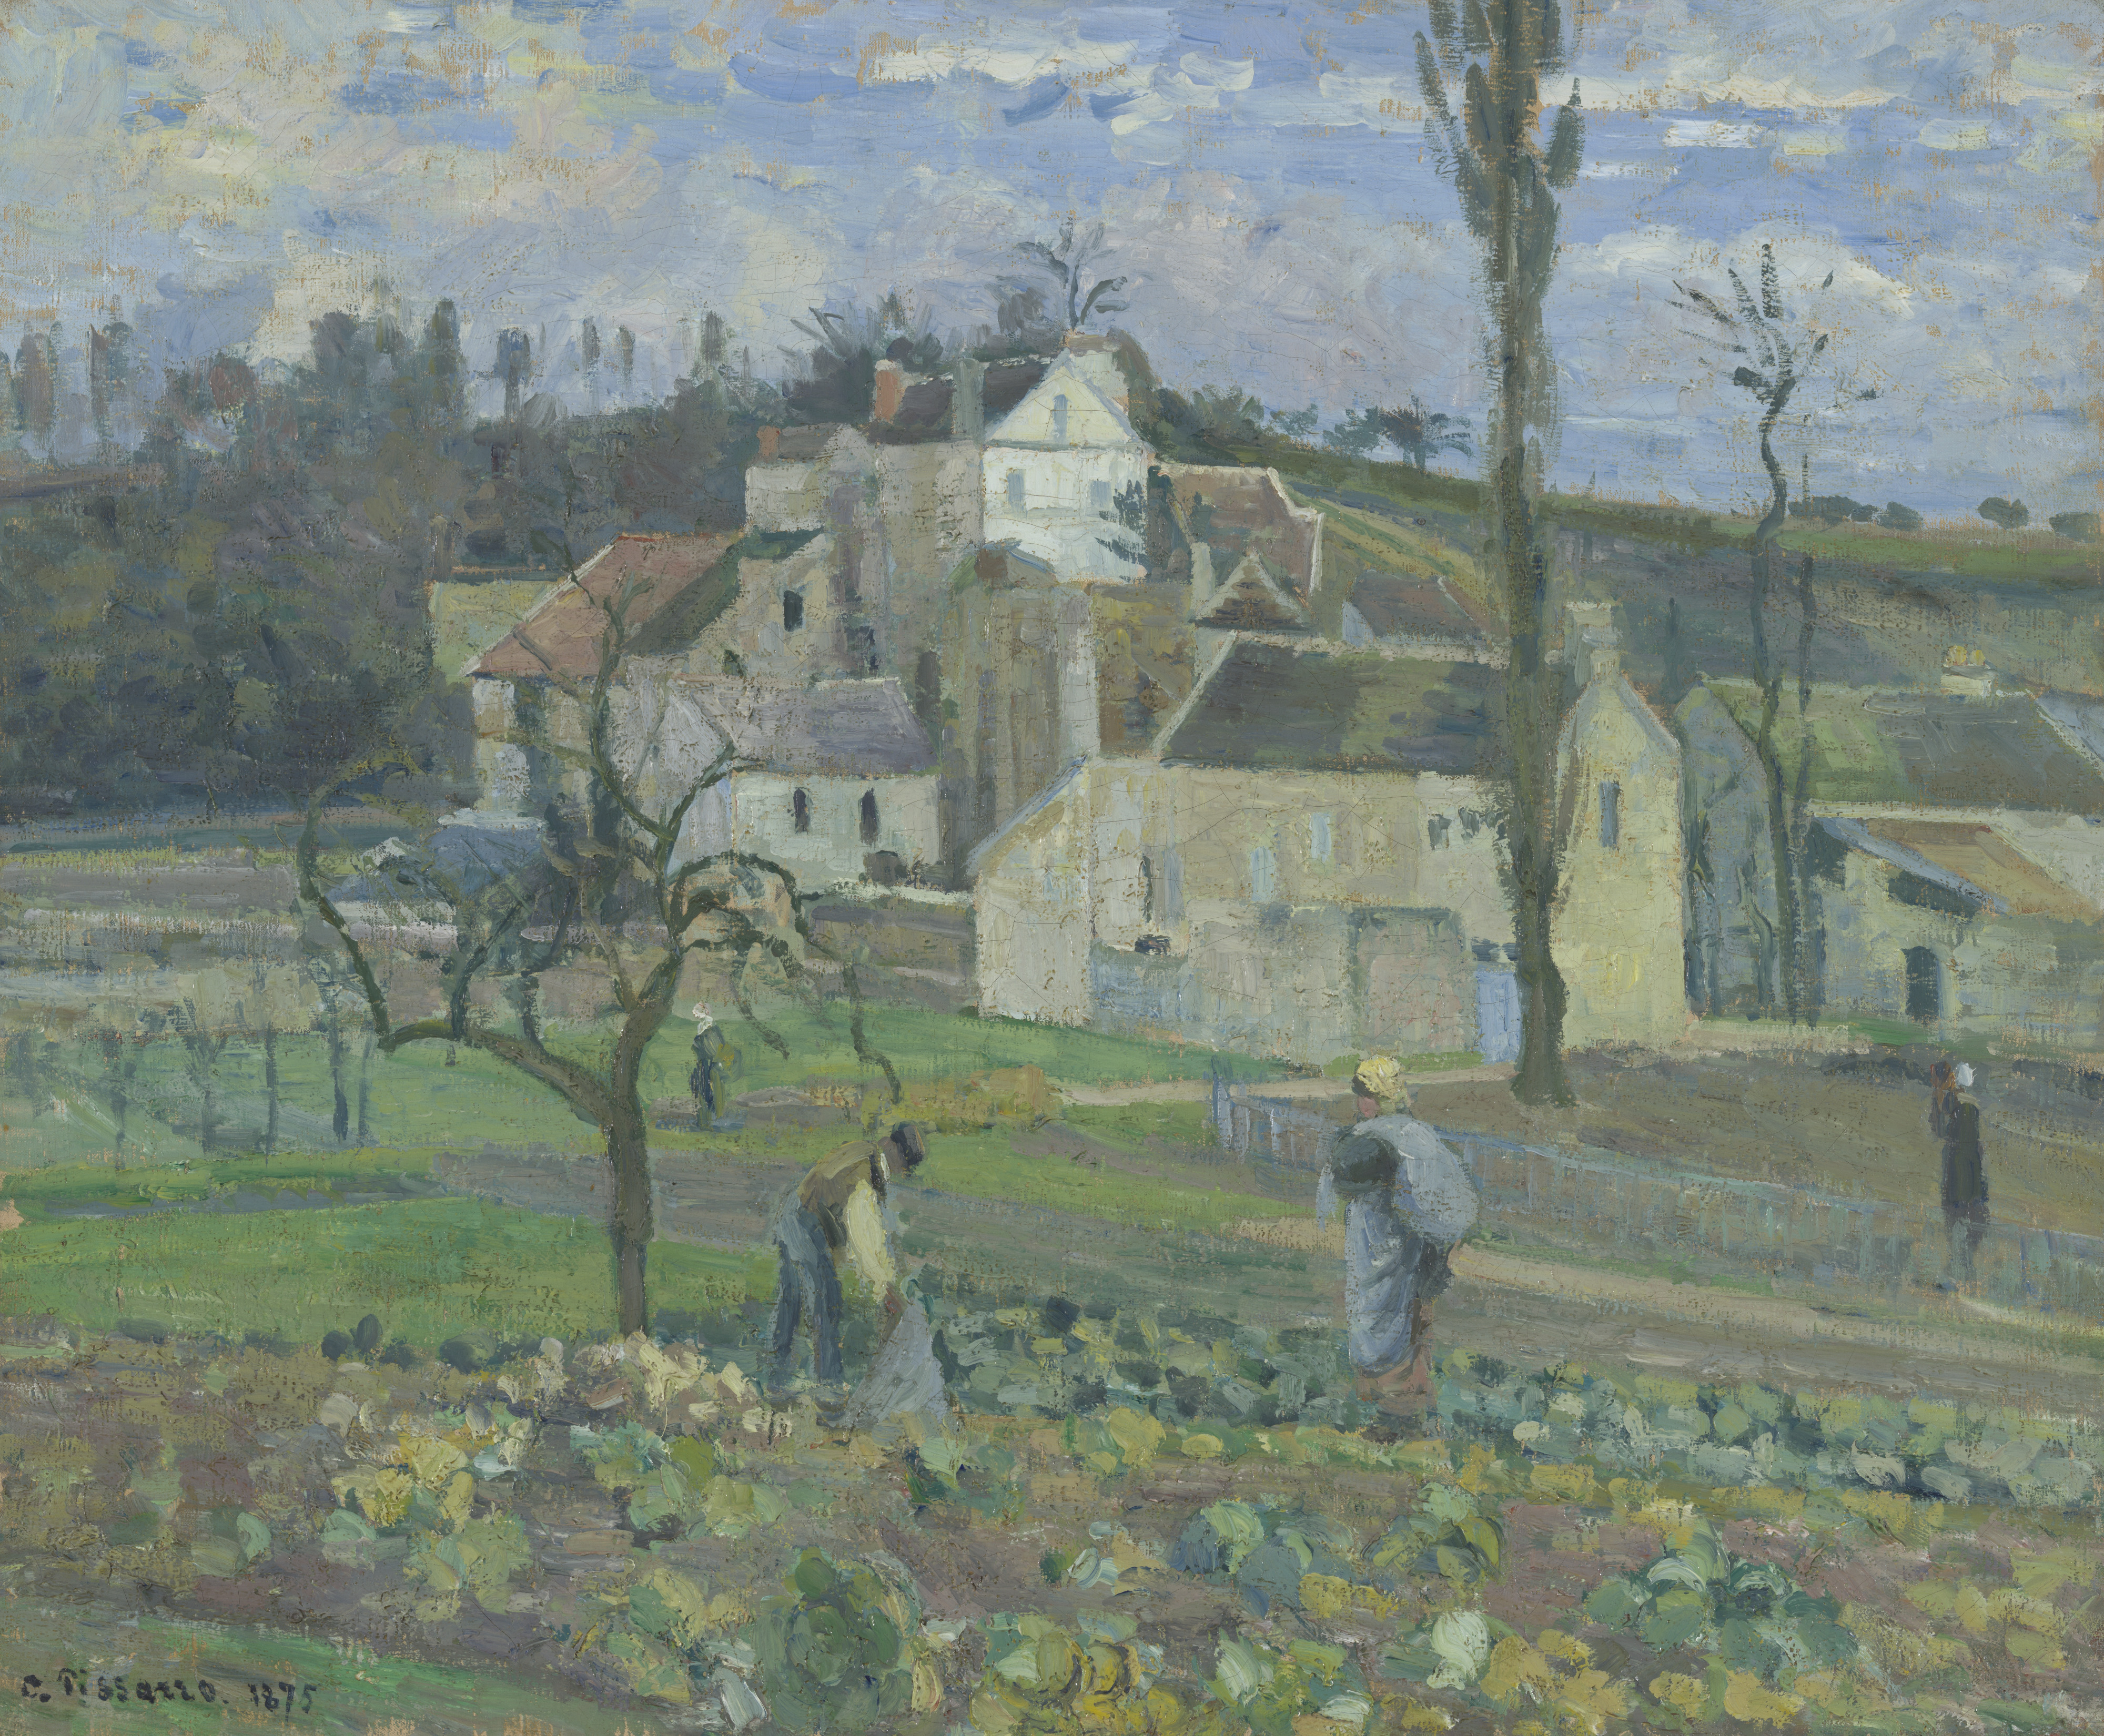 a painting of a farm with a group of people working in the garden